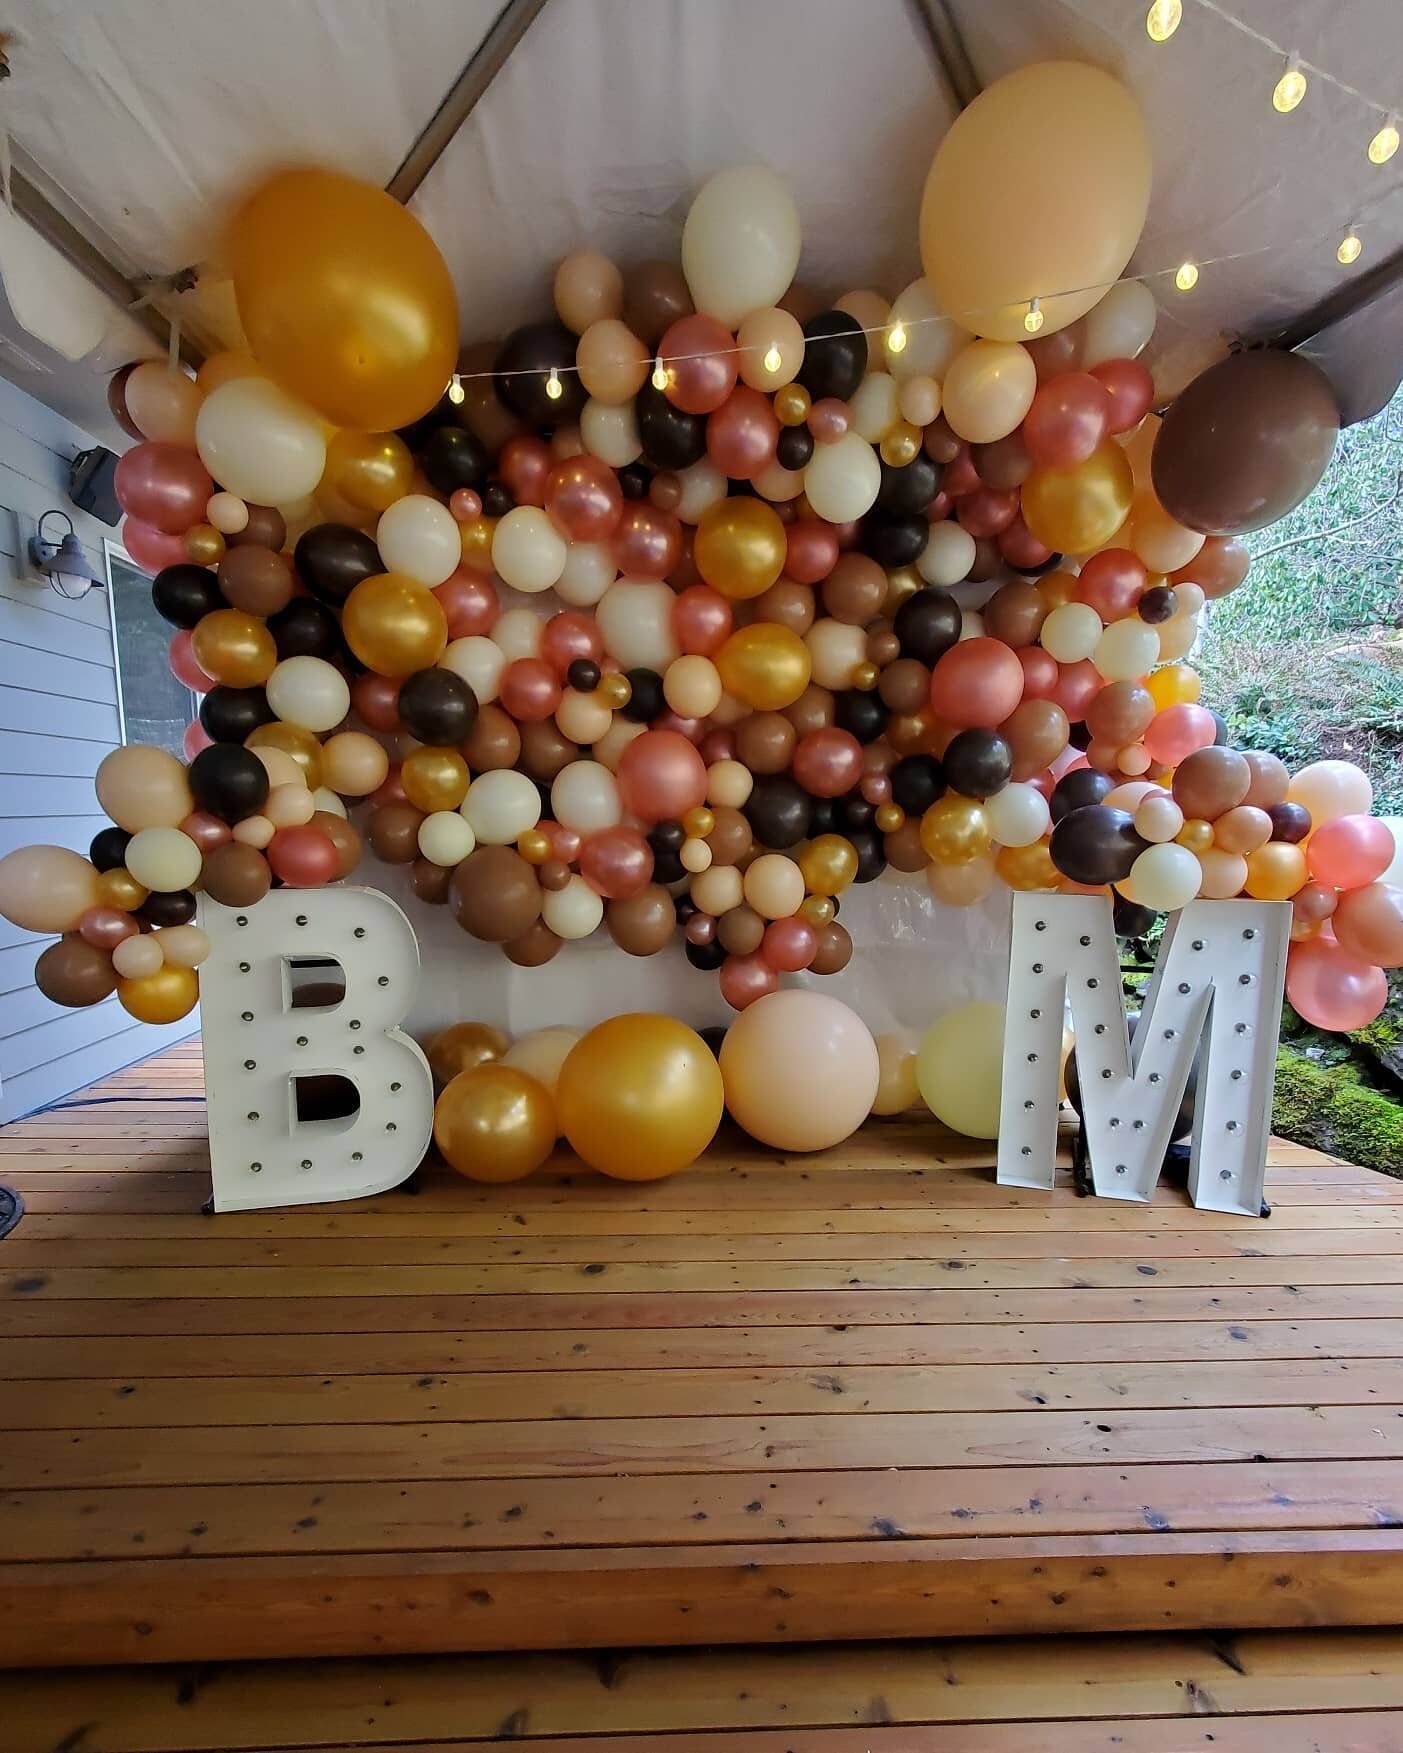 &quot;What's the theme???&quot;
&quot;Balloons, earth tones and MORE BALLOONS!!!&quot;

Happy Birthday Brooklyn and Mitchell!!! 🎈🥳🎈🥳🎈

#balloons #balloonsonbroadway #balloonsportland #balloonspdx #pdxballoons #portlandballoons #balloondecor #dec